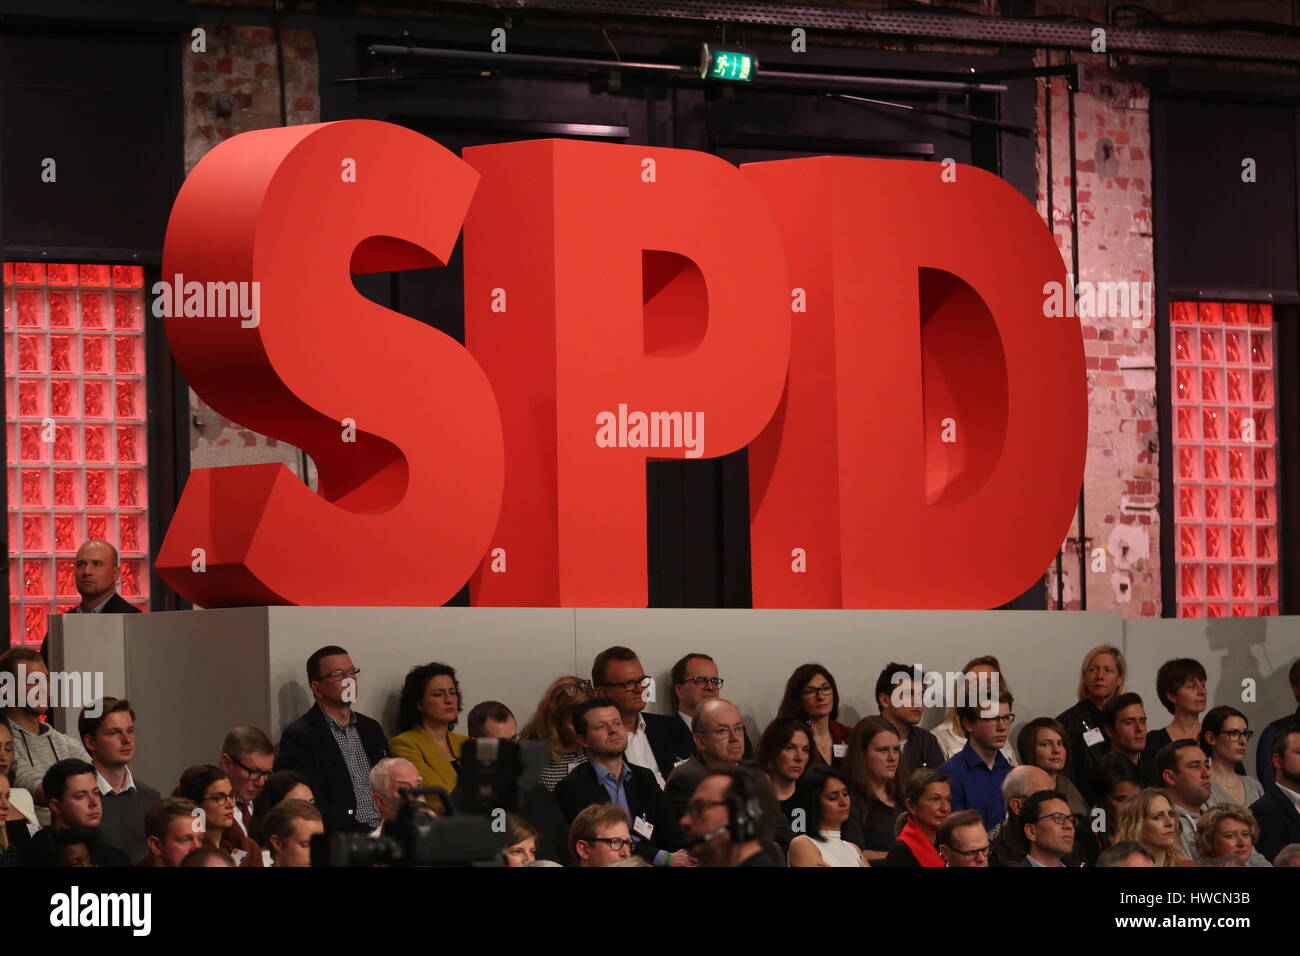 Berlin, Germany. 19th Mar, 2017. Candidate for the post of chancellor Martin Schulz with his speech on the extraordinary Bundesparteitag of SPD in Berlin-Treptow. Martin Schulz was chosen the party leader of SPD. Credit: Simone Kuhlmey/Pacific Press/Alamy Live News Stock Photo